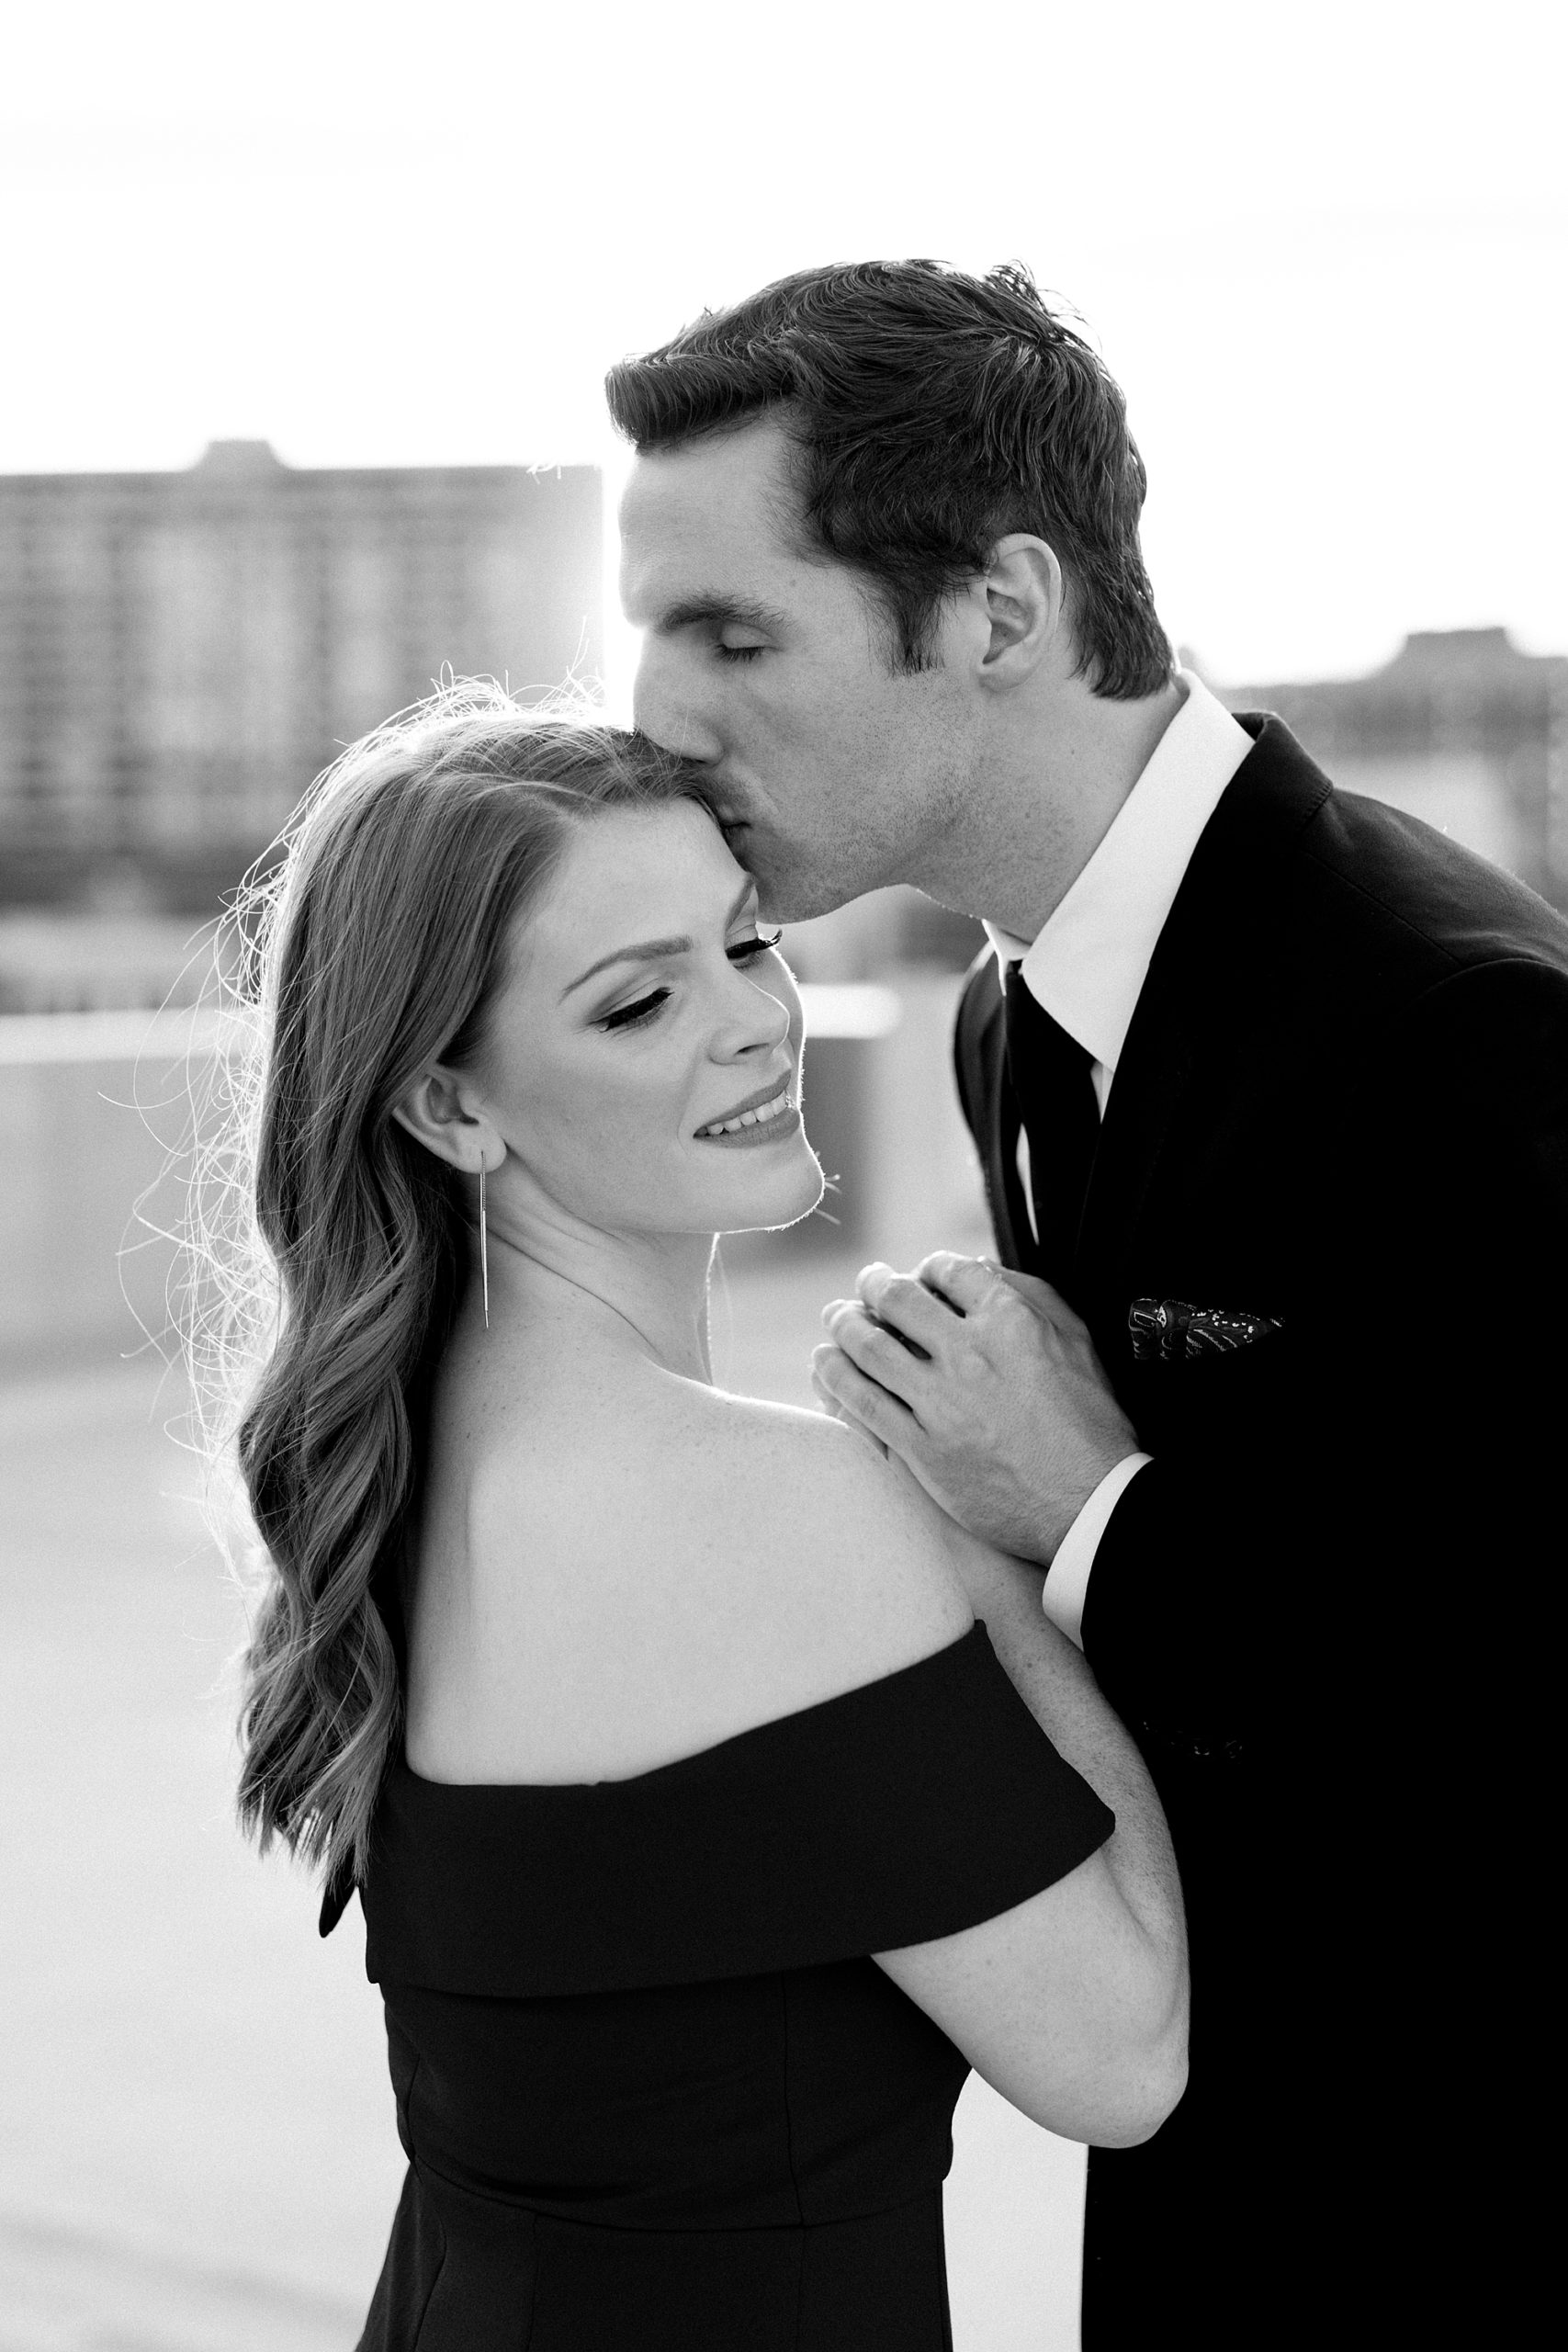 Kissing on a rooftop | Detroit | Breanne Rochelle Photography